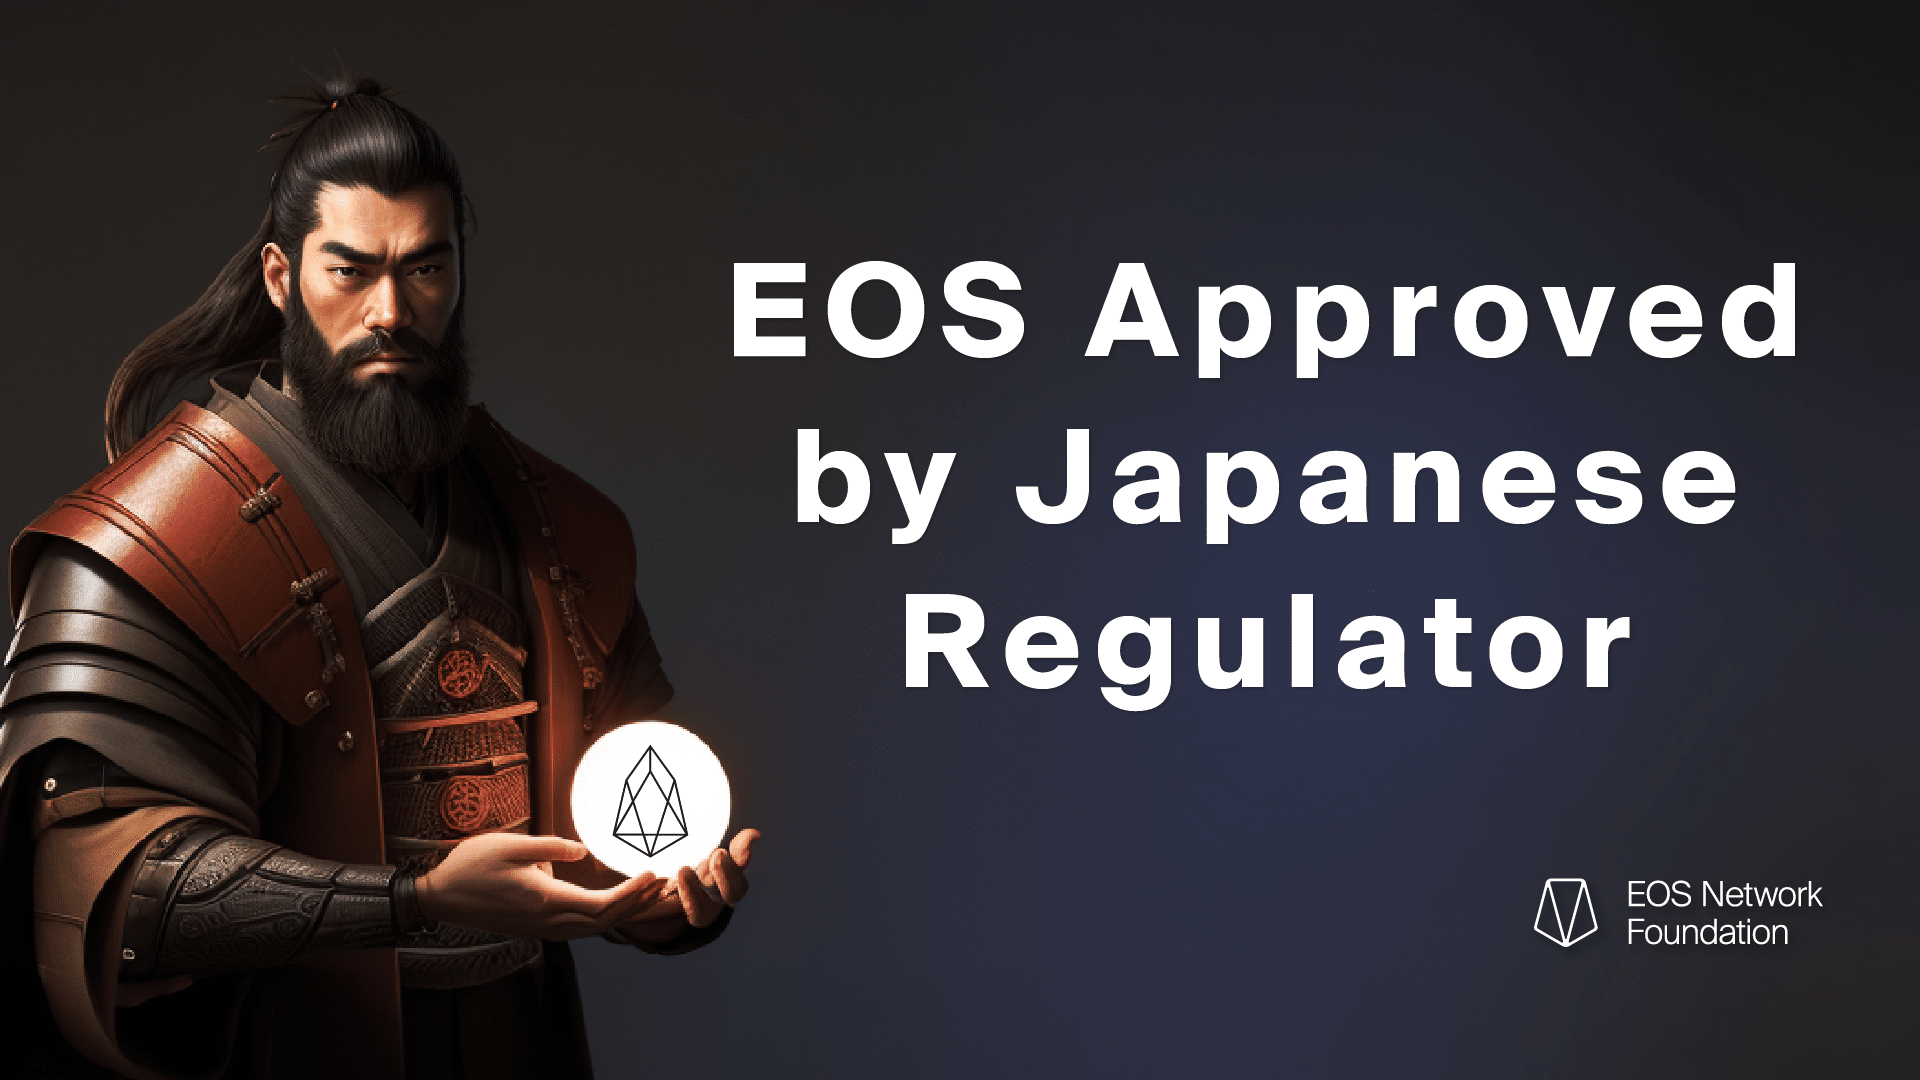 EOS Receives Regulatory Approval in Japan, Expanding Adoption in East Asian Markets